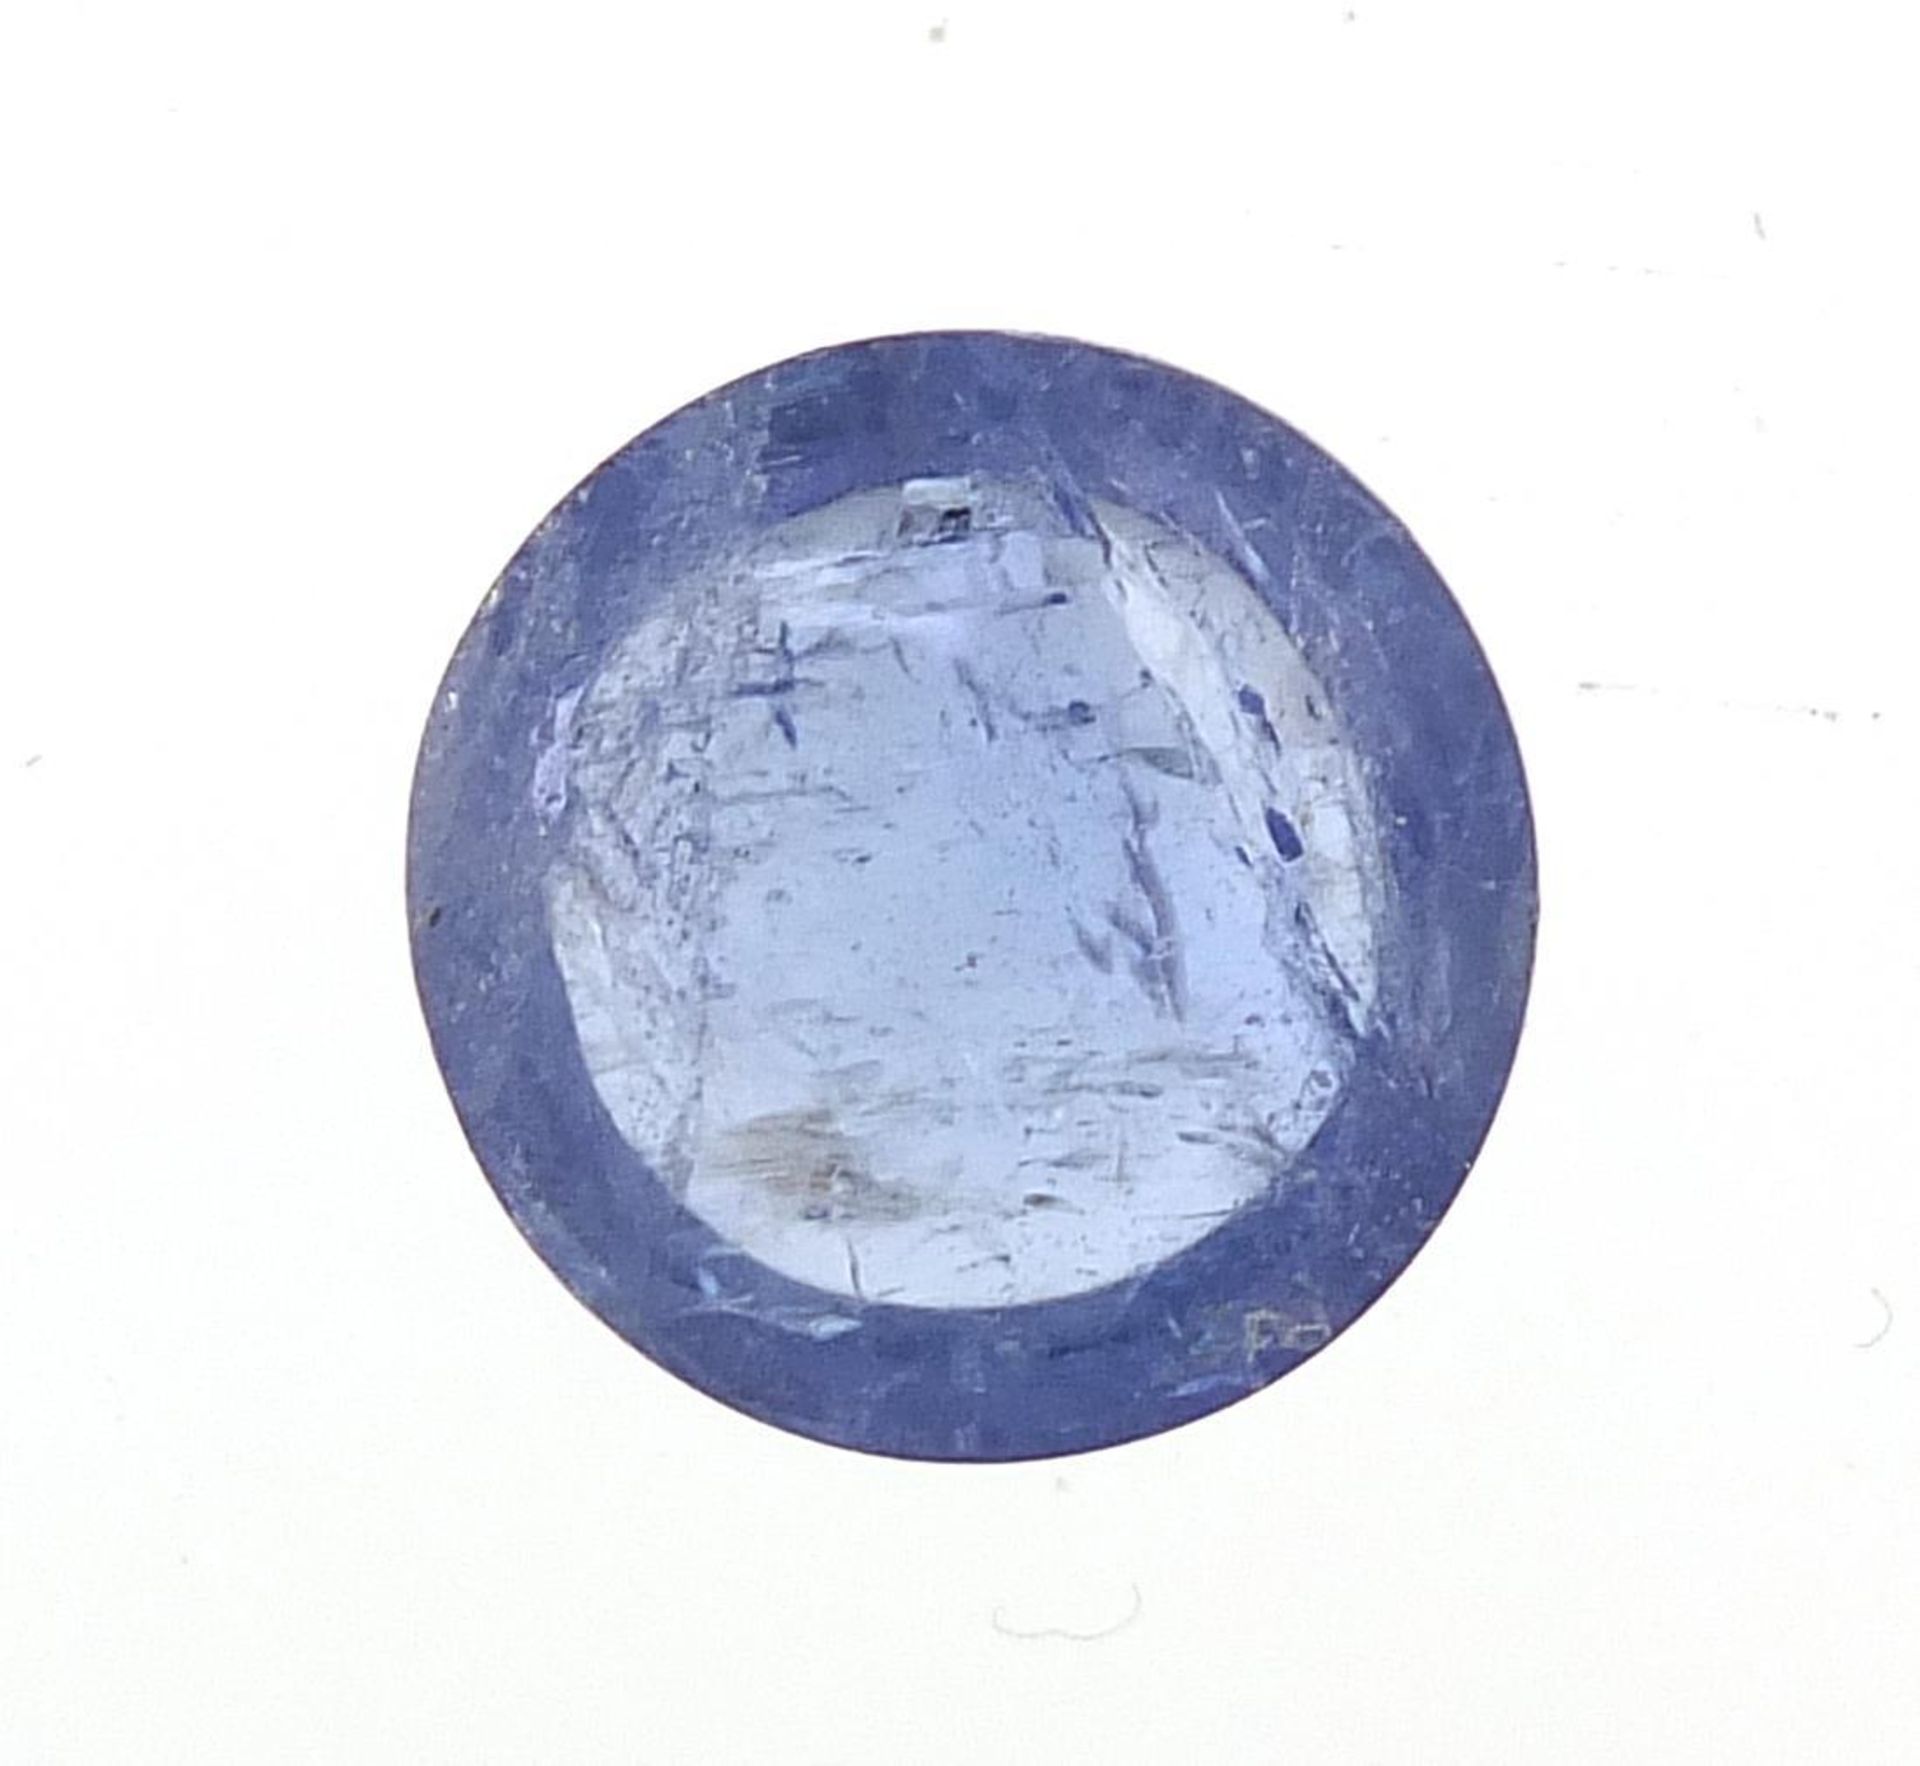 Tanzanite cabochon, approximately 10mm in diameter x 4.9mm deep - Image 3 of 3